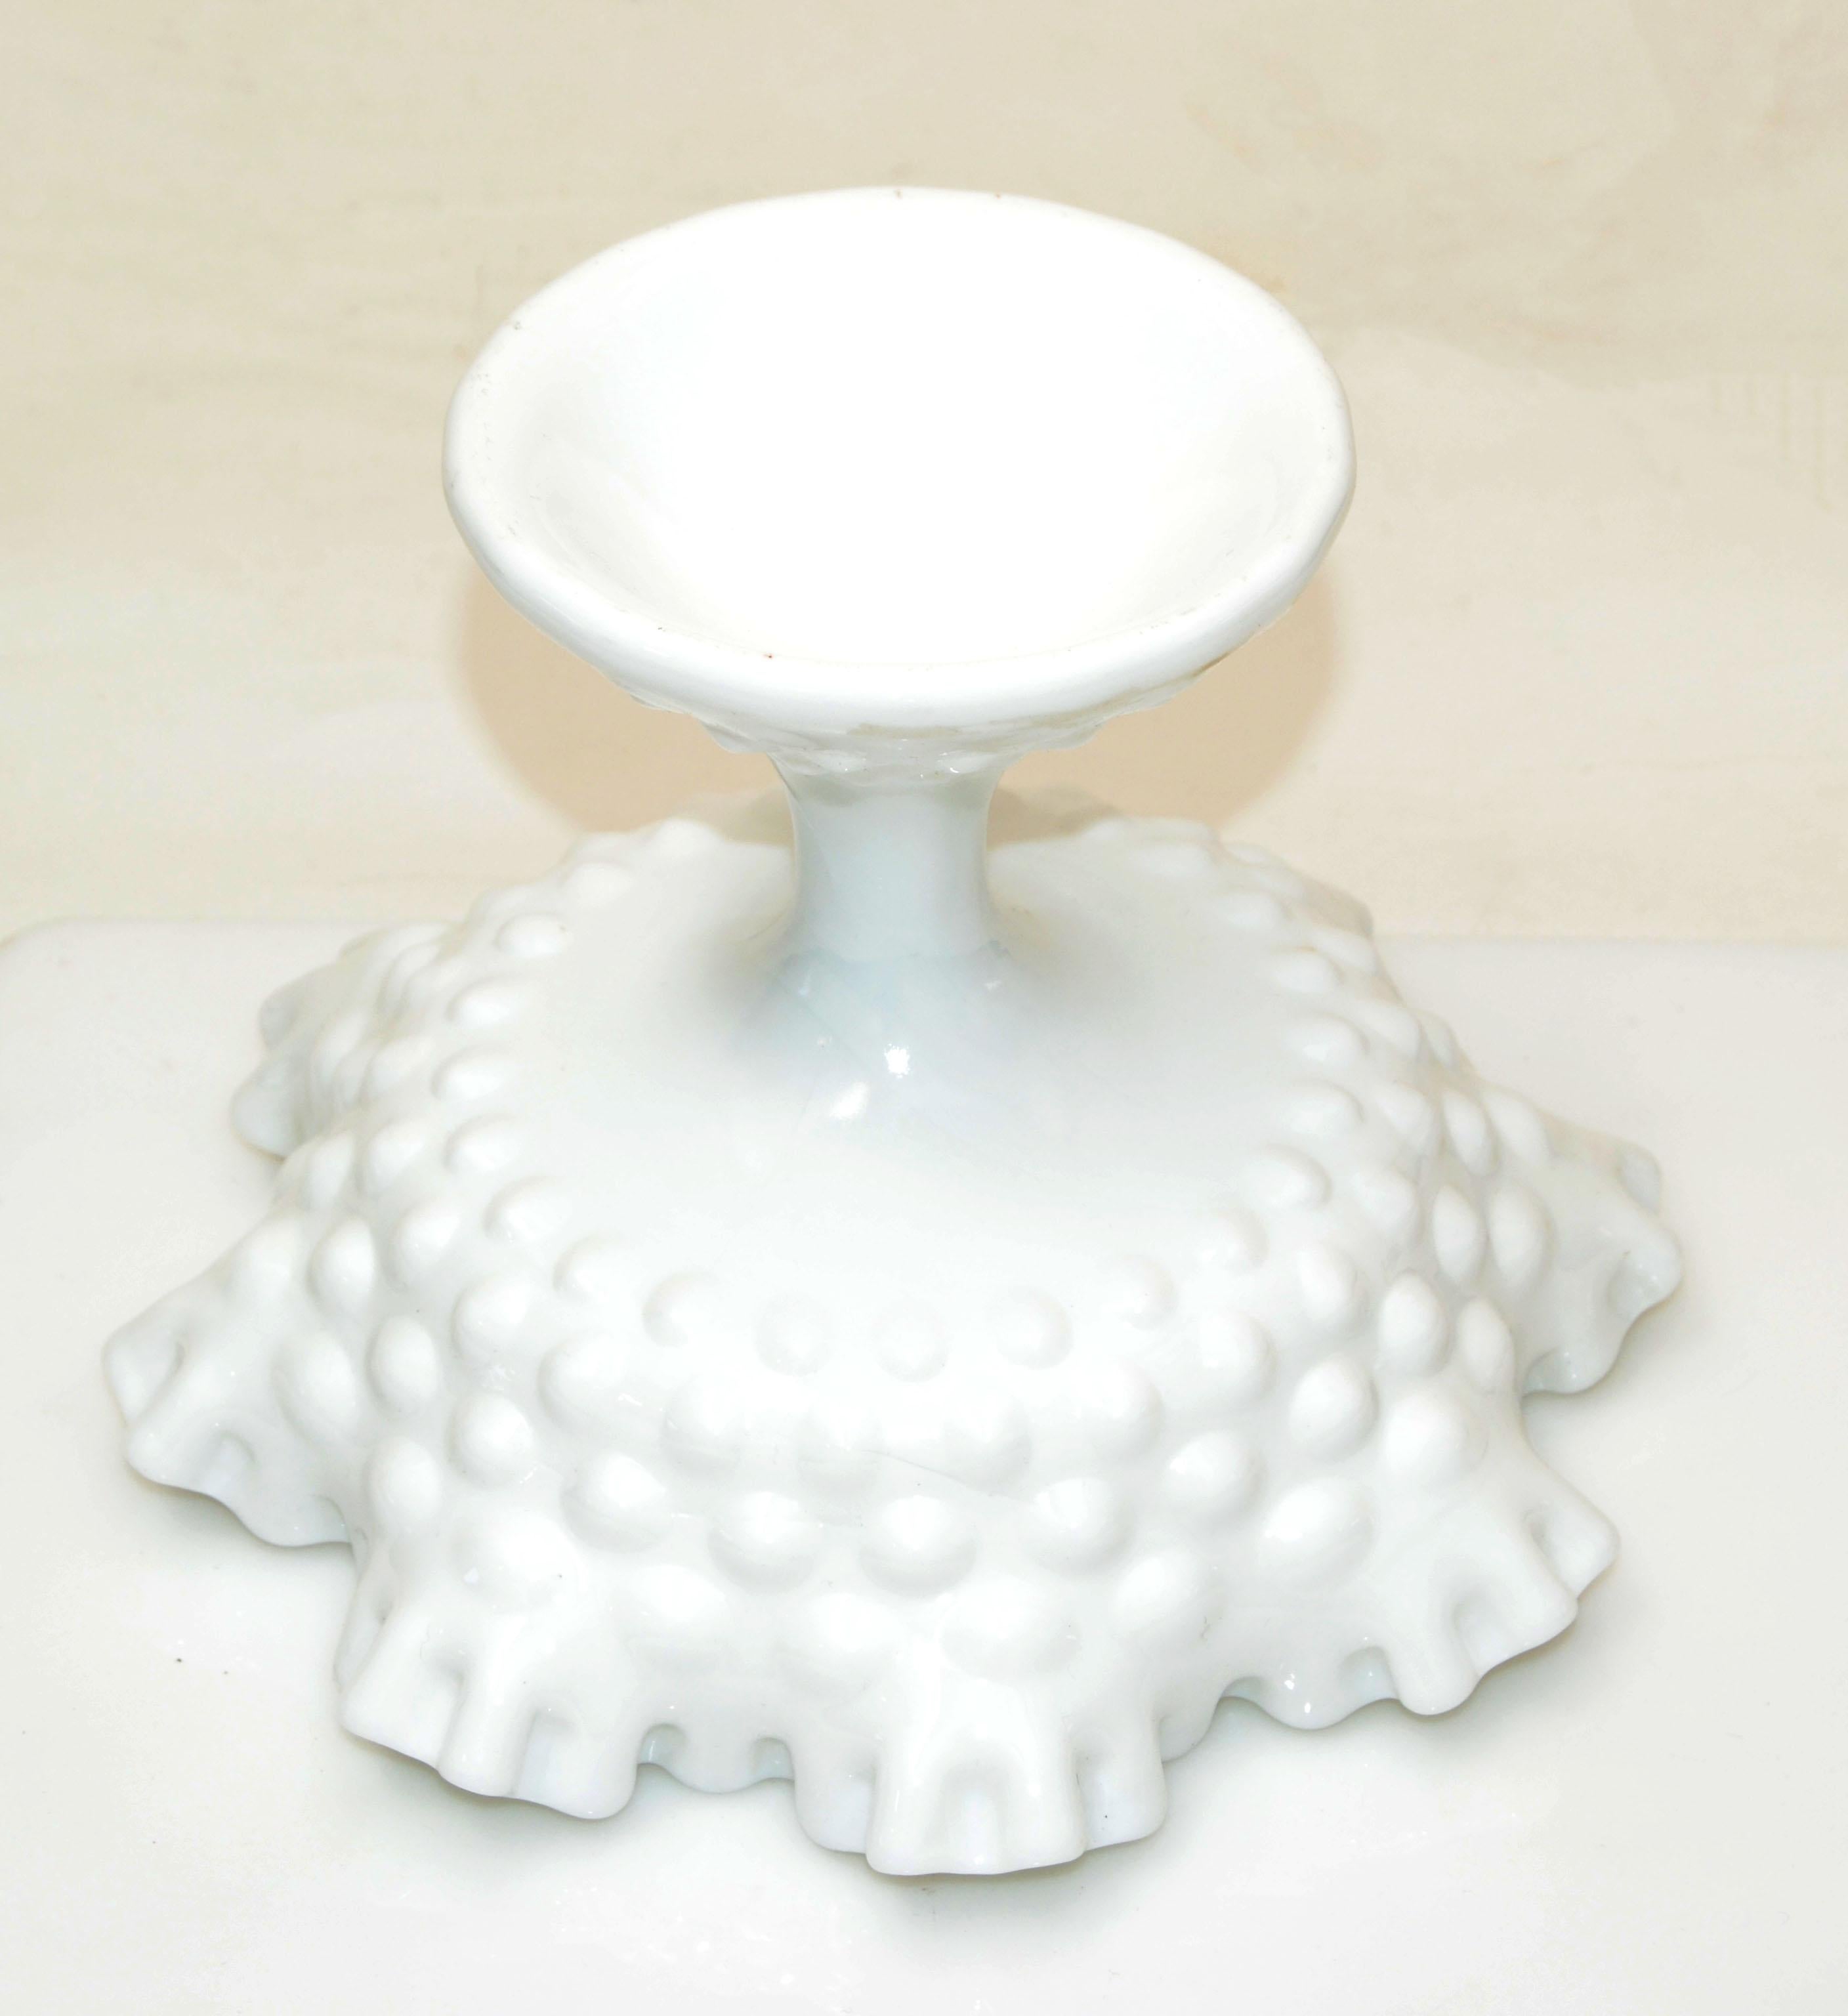 20th Century Fenton Hobnail White Ruffled Milk Glass Footed Bowl Candy Cream Serving Bowl 70s For Sale